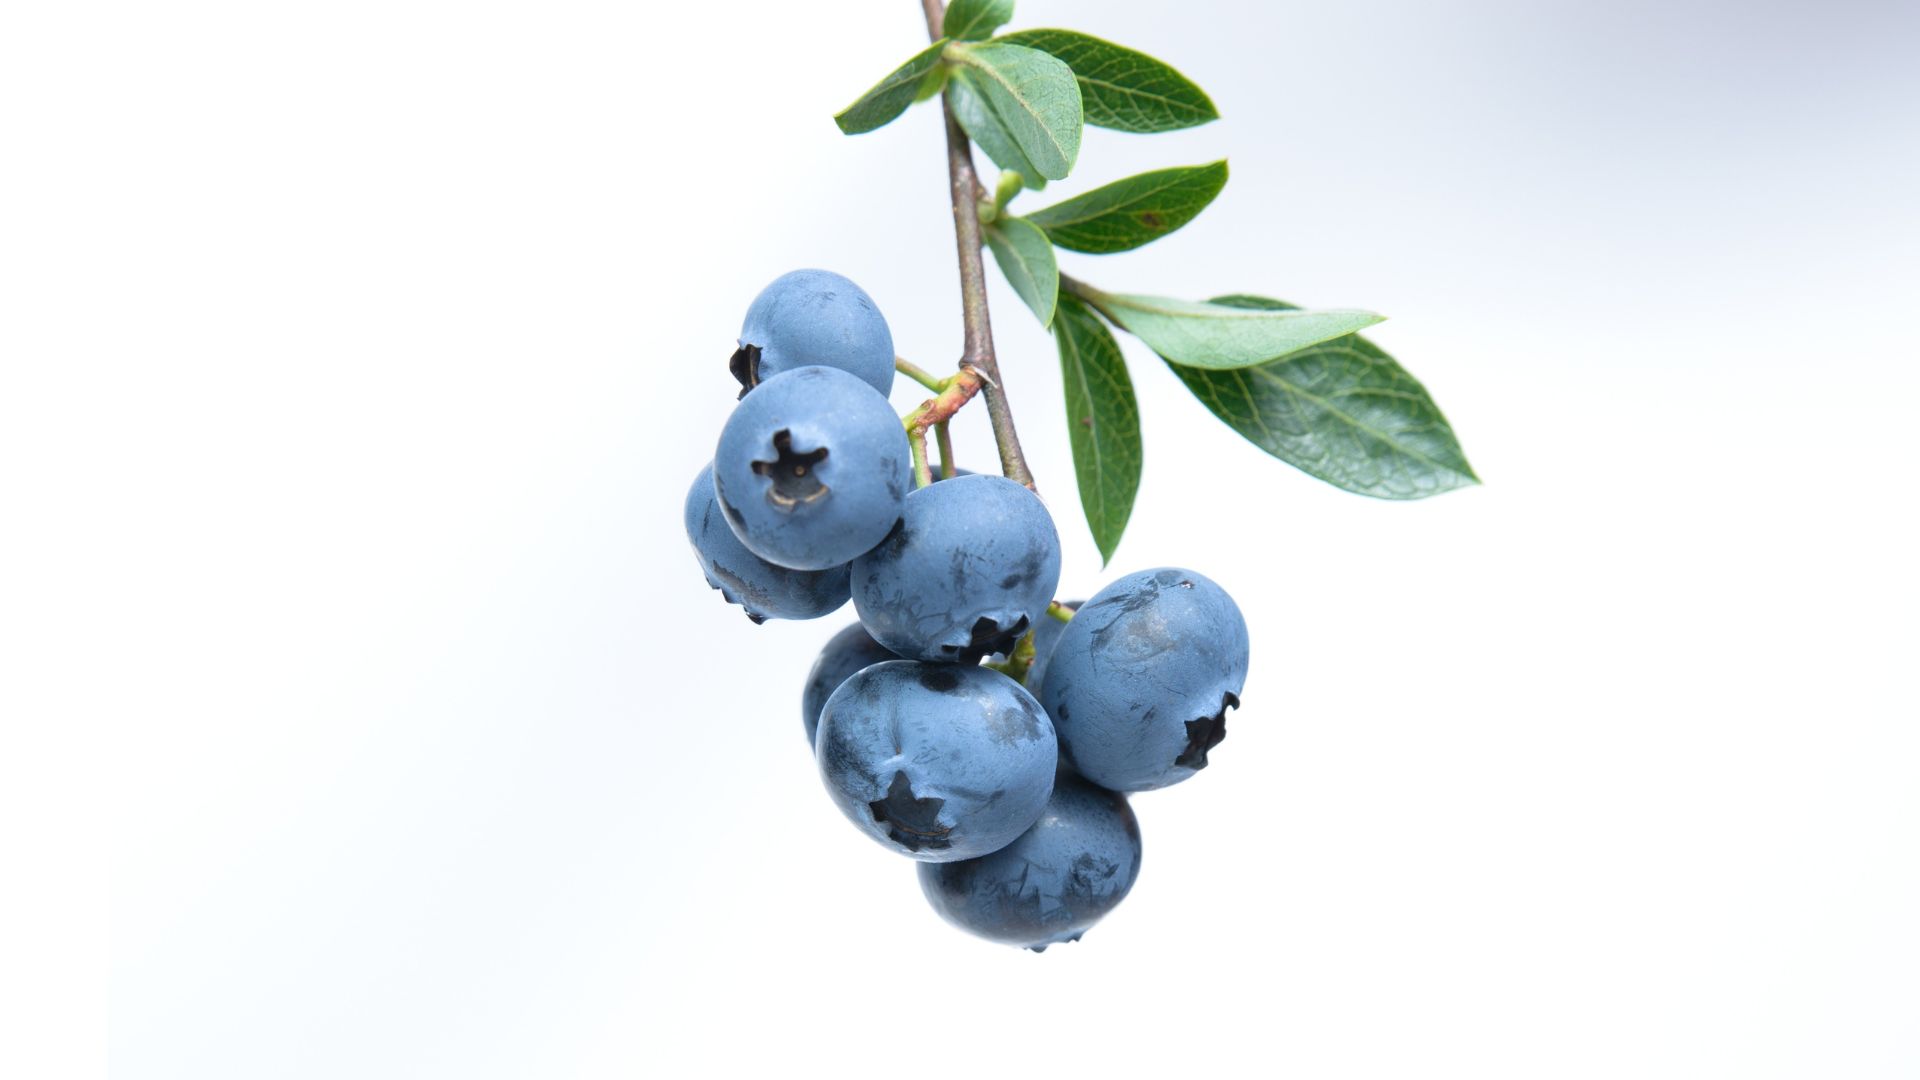 The Berry Best: Growing and Enjoying Blueberry Bushes this Summer